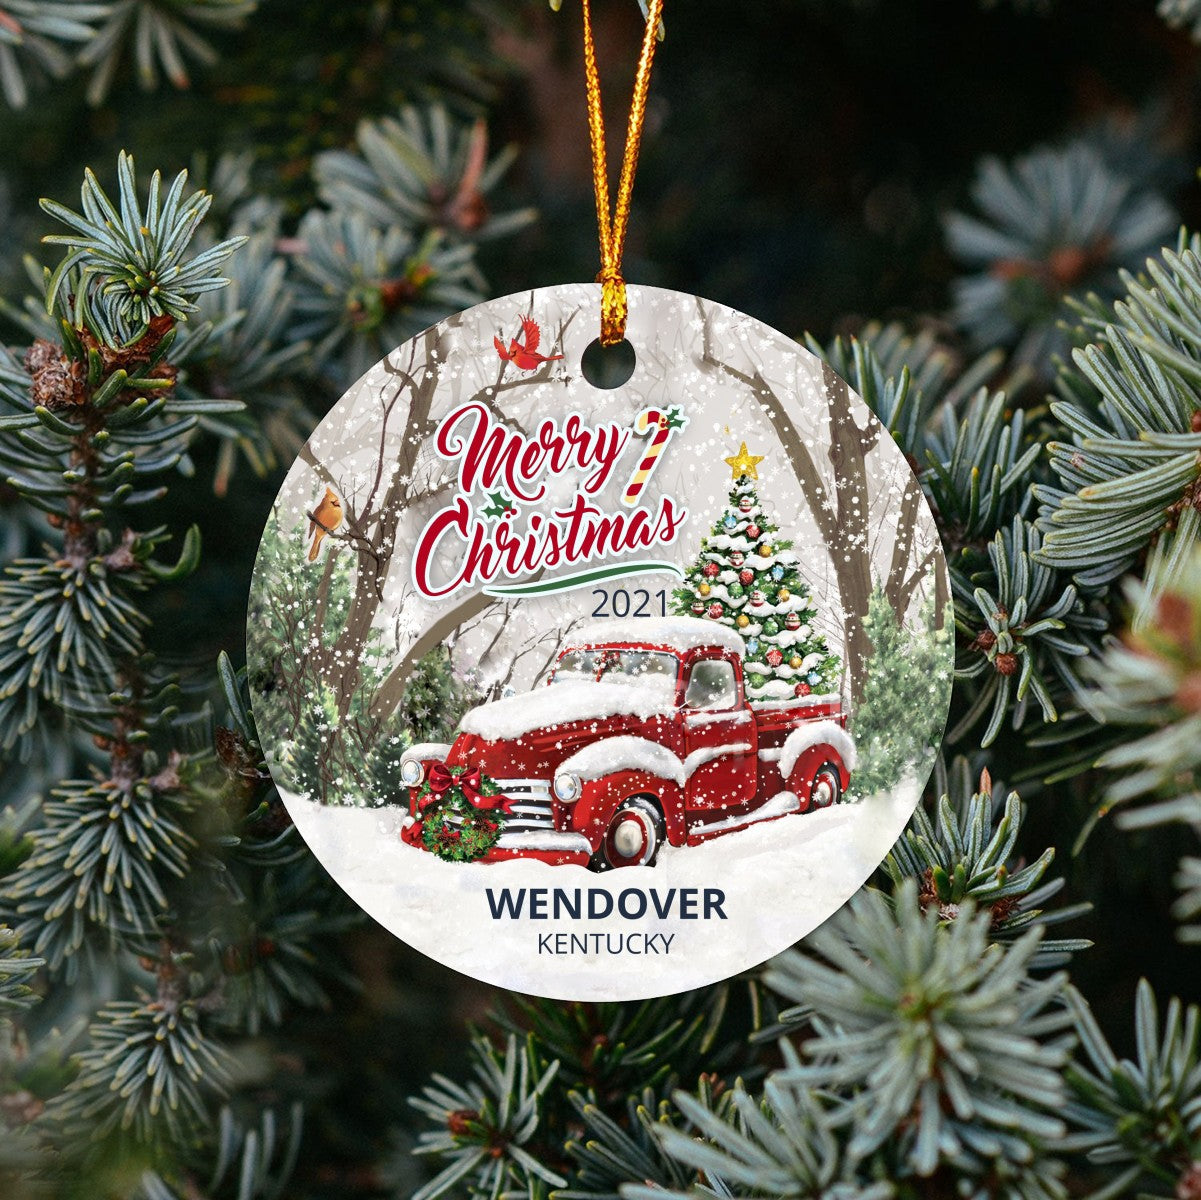 Christmas Tree Ornaments Wendover - Ornament With Name City, State Wendover Kentucky KY Ornament - Red Truck Xmas Ornaments 3'' Plastic Gift For Family, Friend And Housewarming